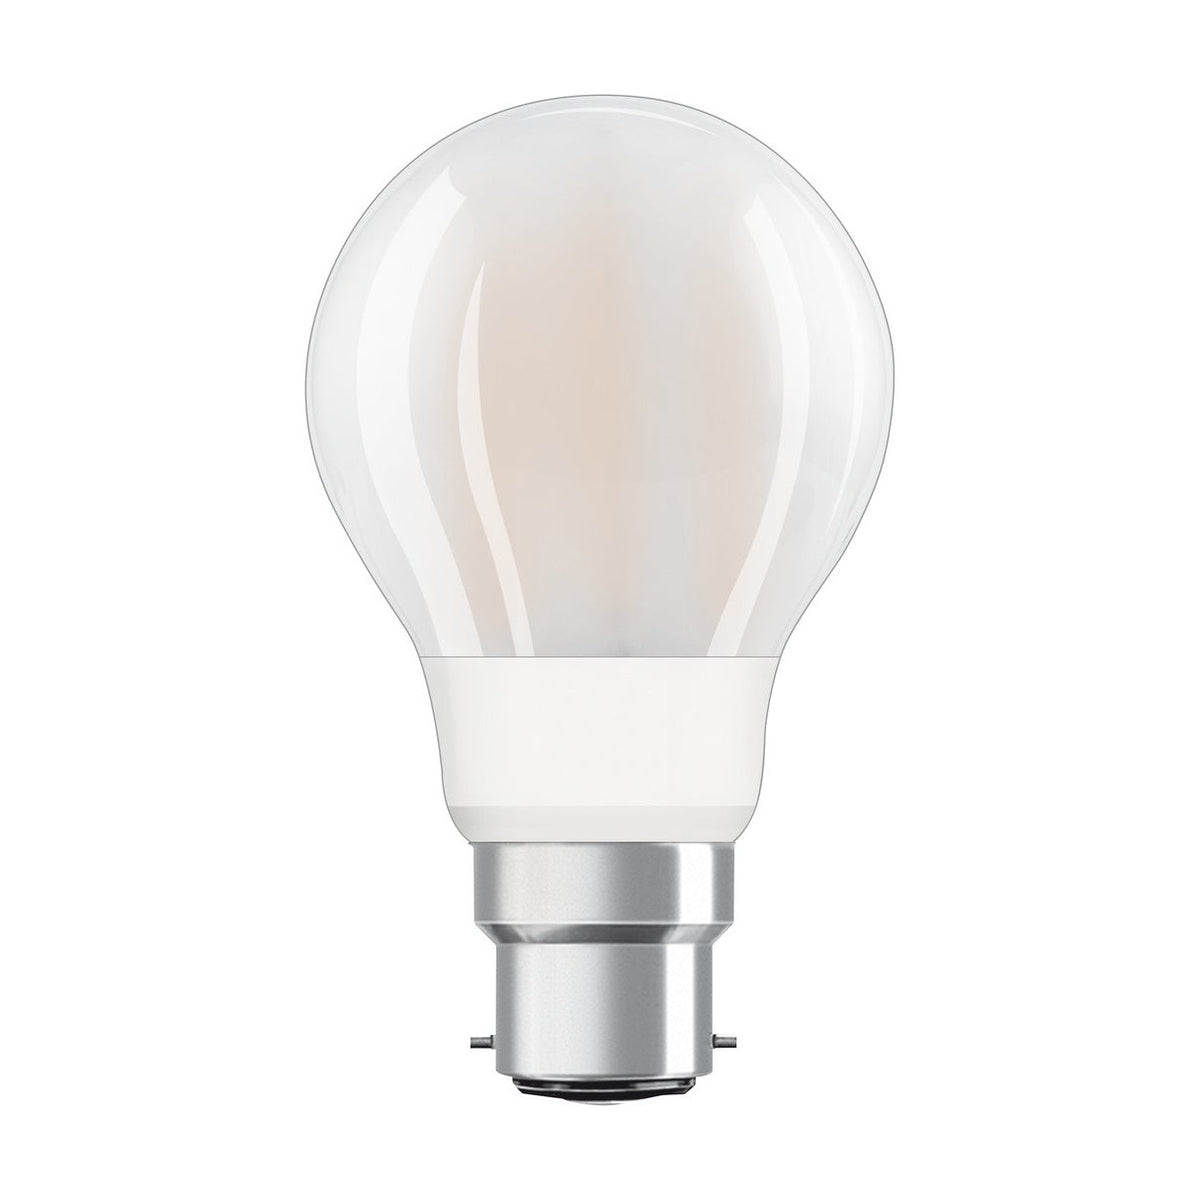 LEDVANCE Classic bulb shape with filament-style with WiFi technology,6 W, Warm weiß, B22, 1-er Pack